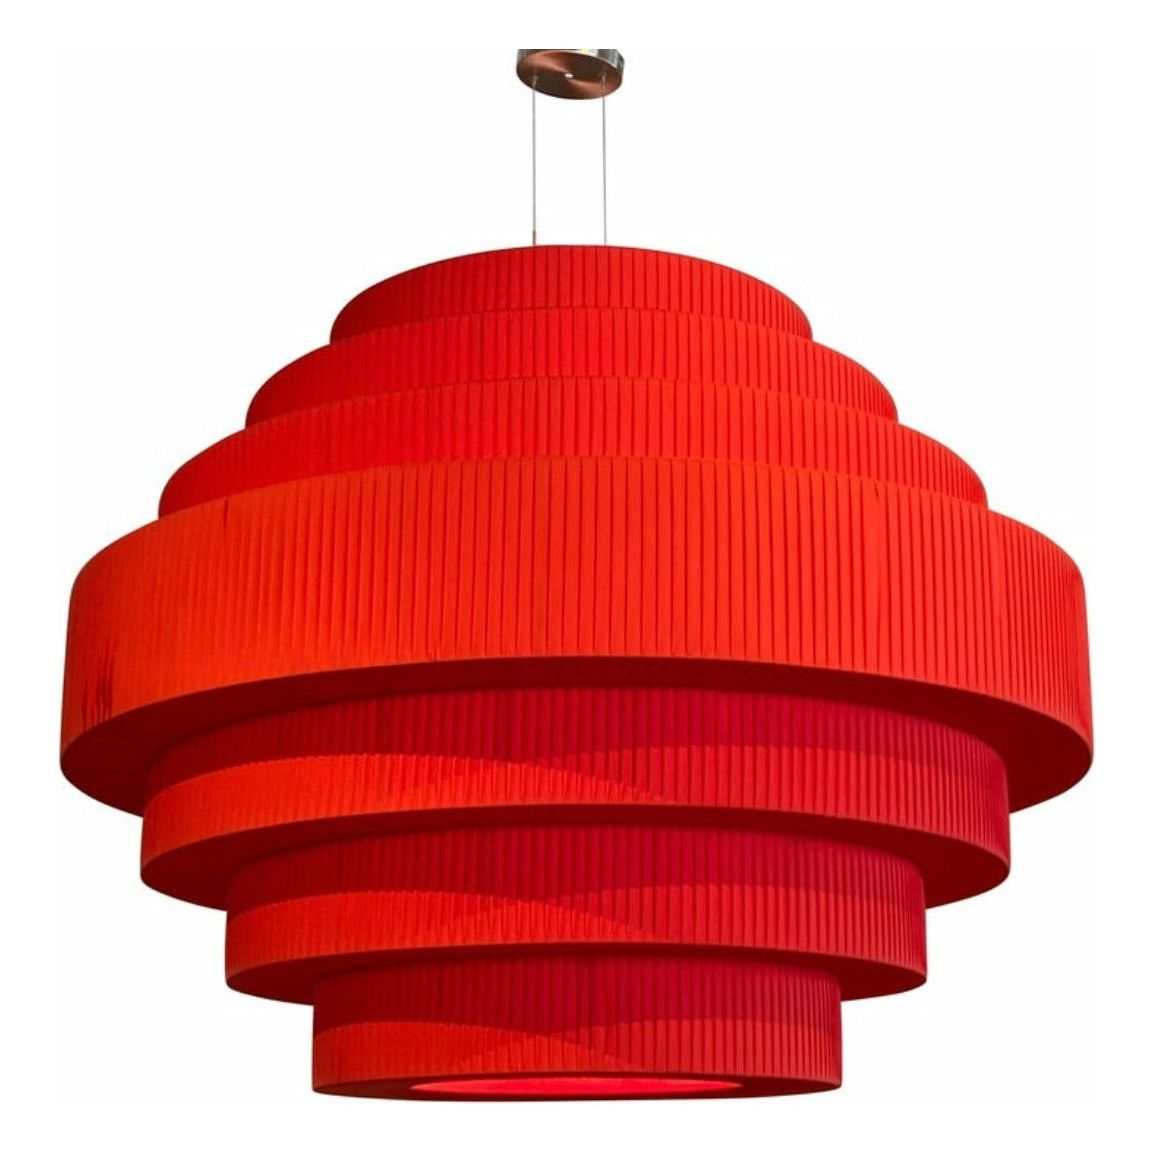 Red Mos Pendant by Joana Bover for Bover - colletteconsignment.com